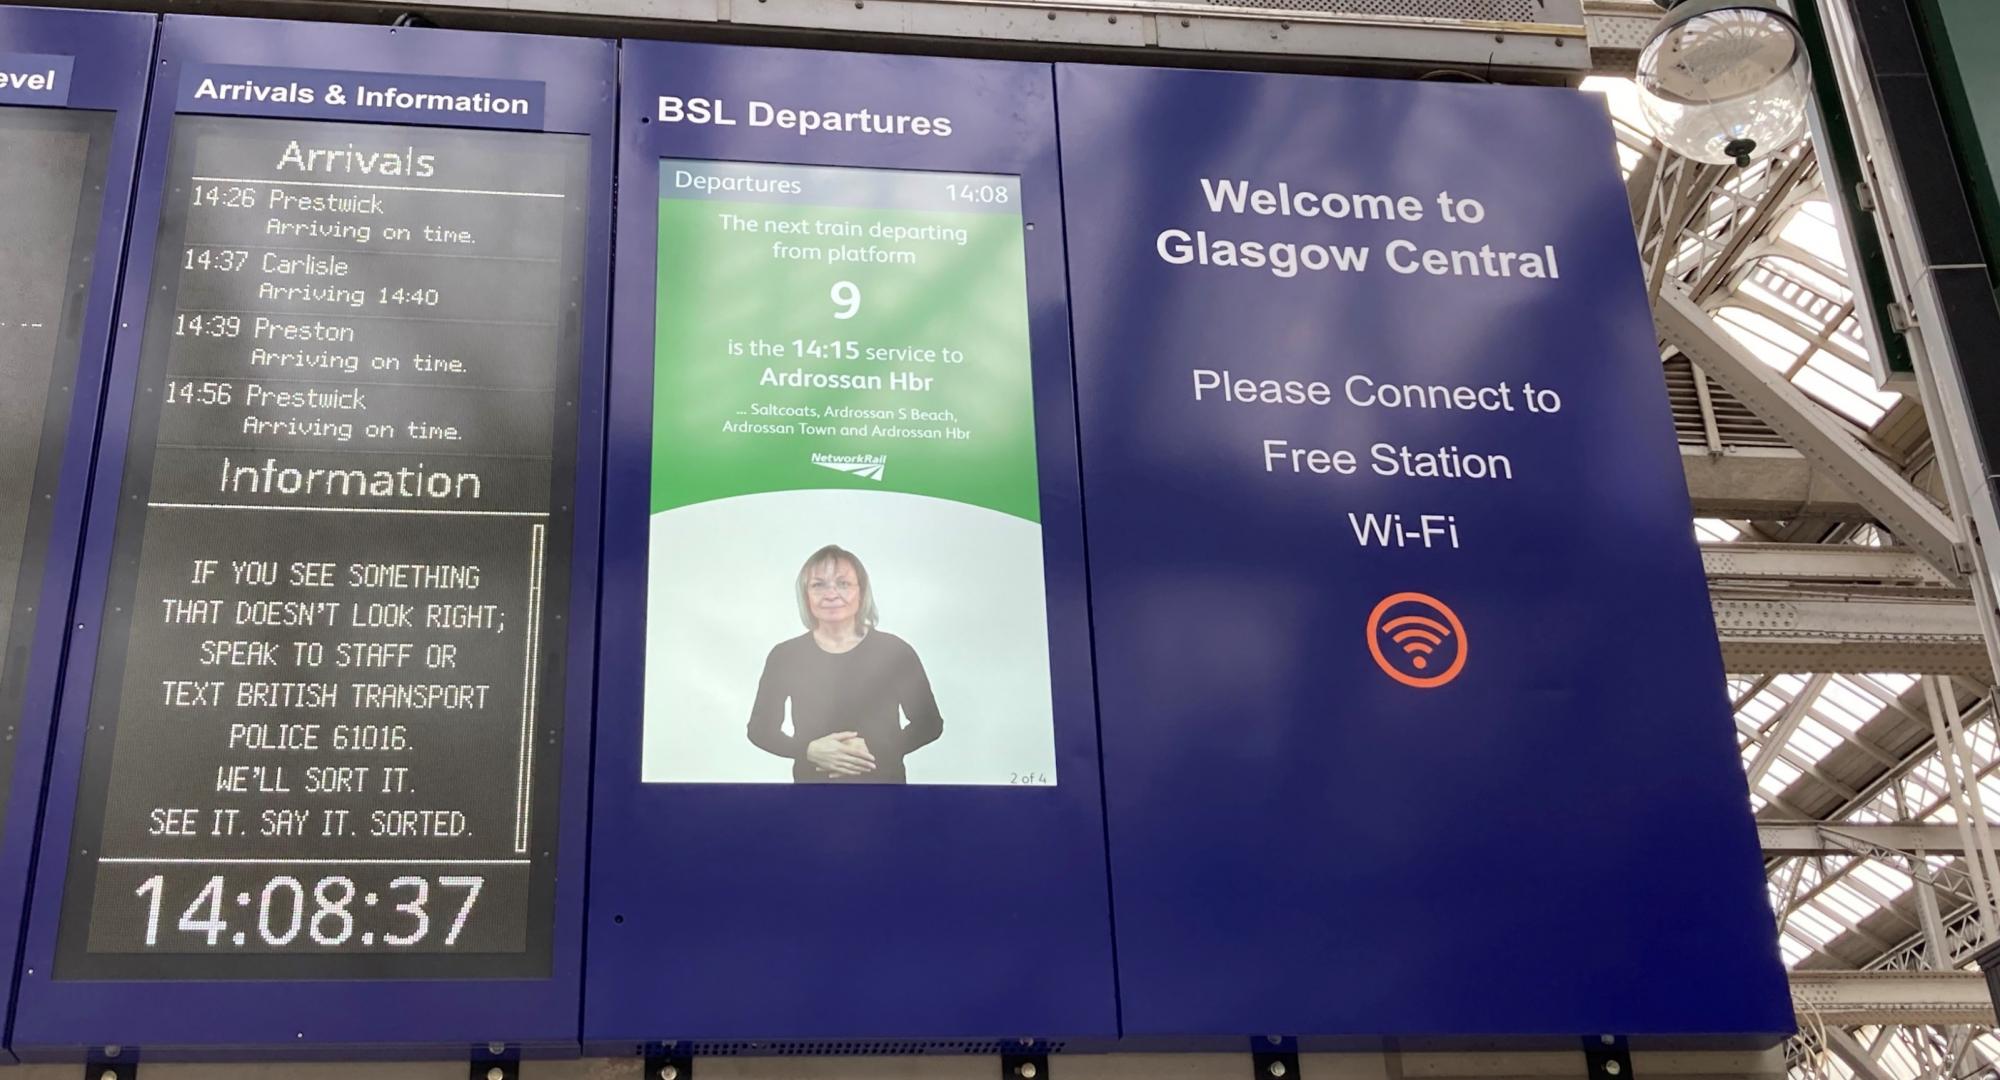 BSL screen at Glasgow Central